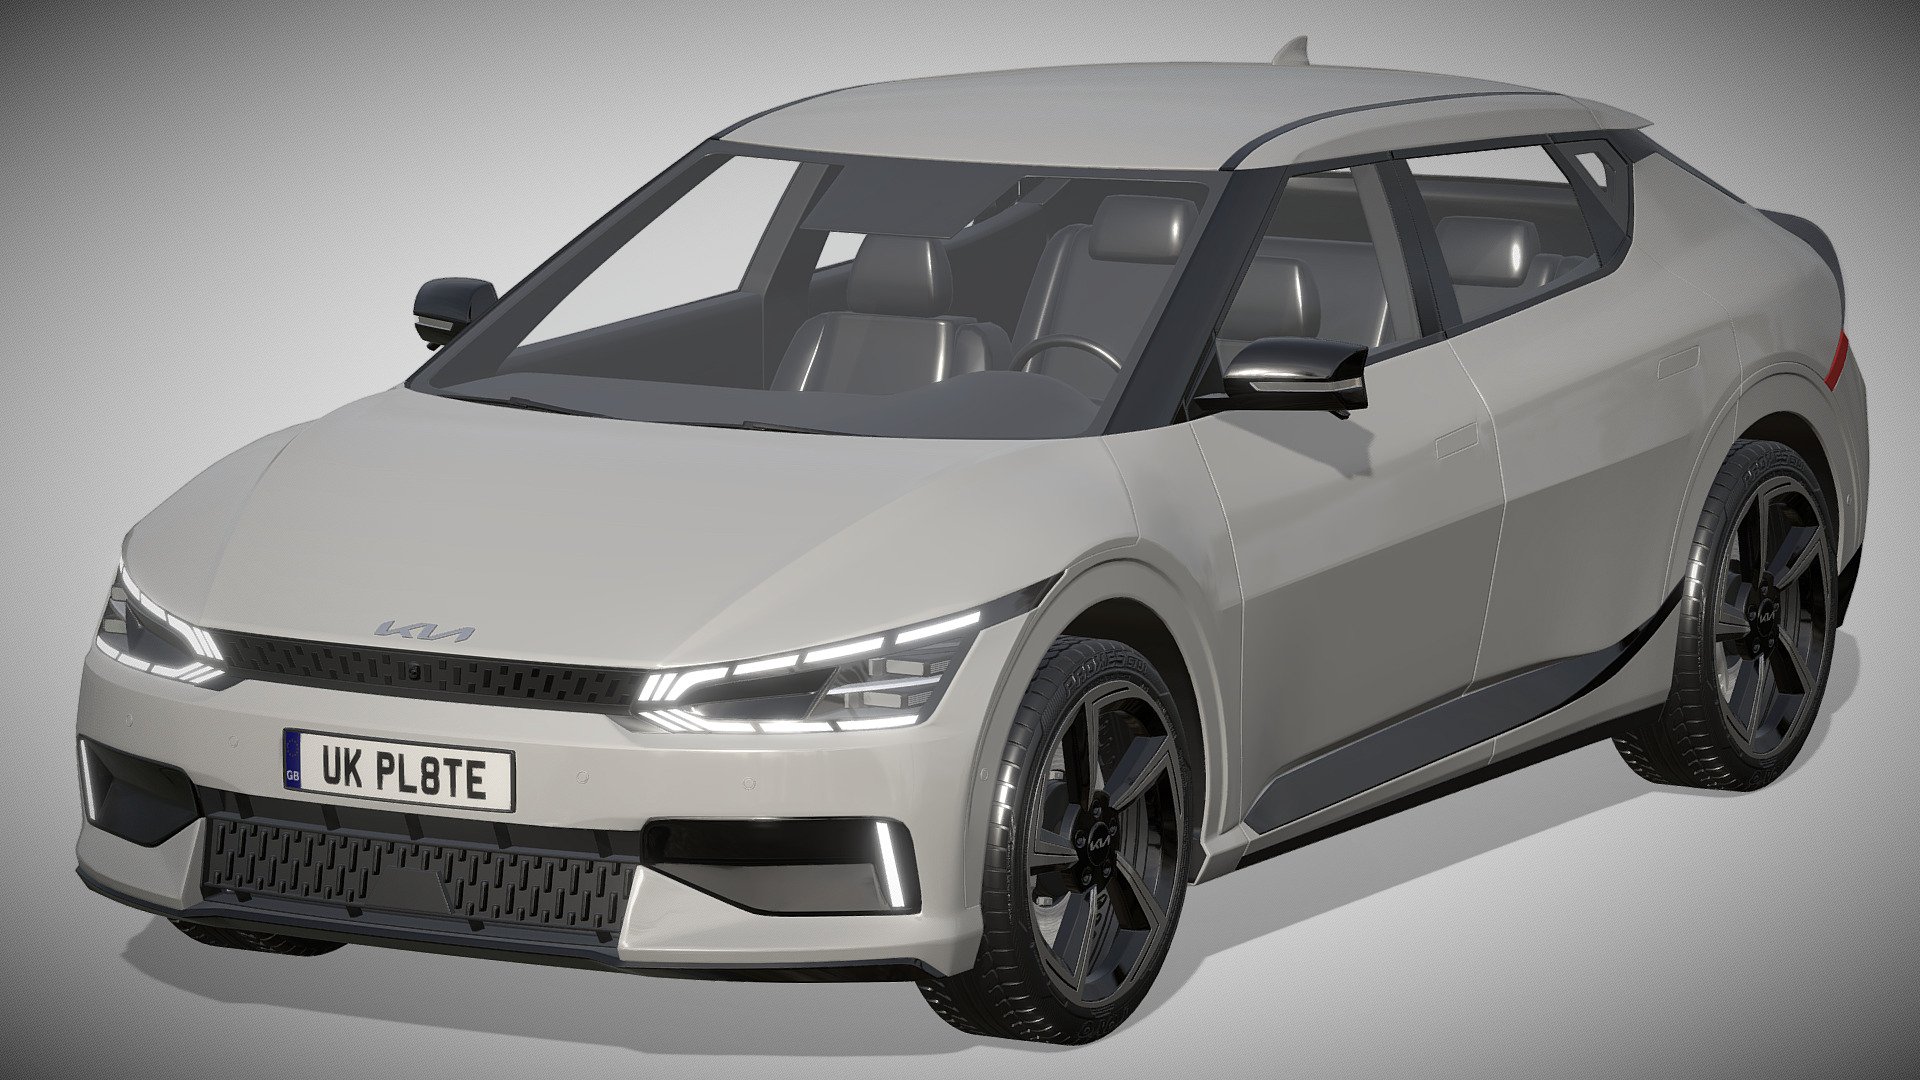 Kia EV6 GT 2022

https://www.kia.com/uk/new-cars/ev6/

Clean geometry Light weight model, yet completely detailed for HI-Res renders. Use for movies, Advertisements or games

Corona render and materials

All textures include in *.rar files

Lighting setup is not included in the file! - Kia EV6 GT 2022 - Buy Royalty Free 3D model by zifir3d 3d model